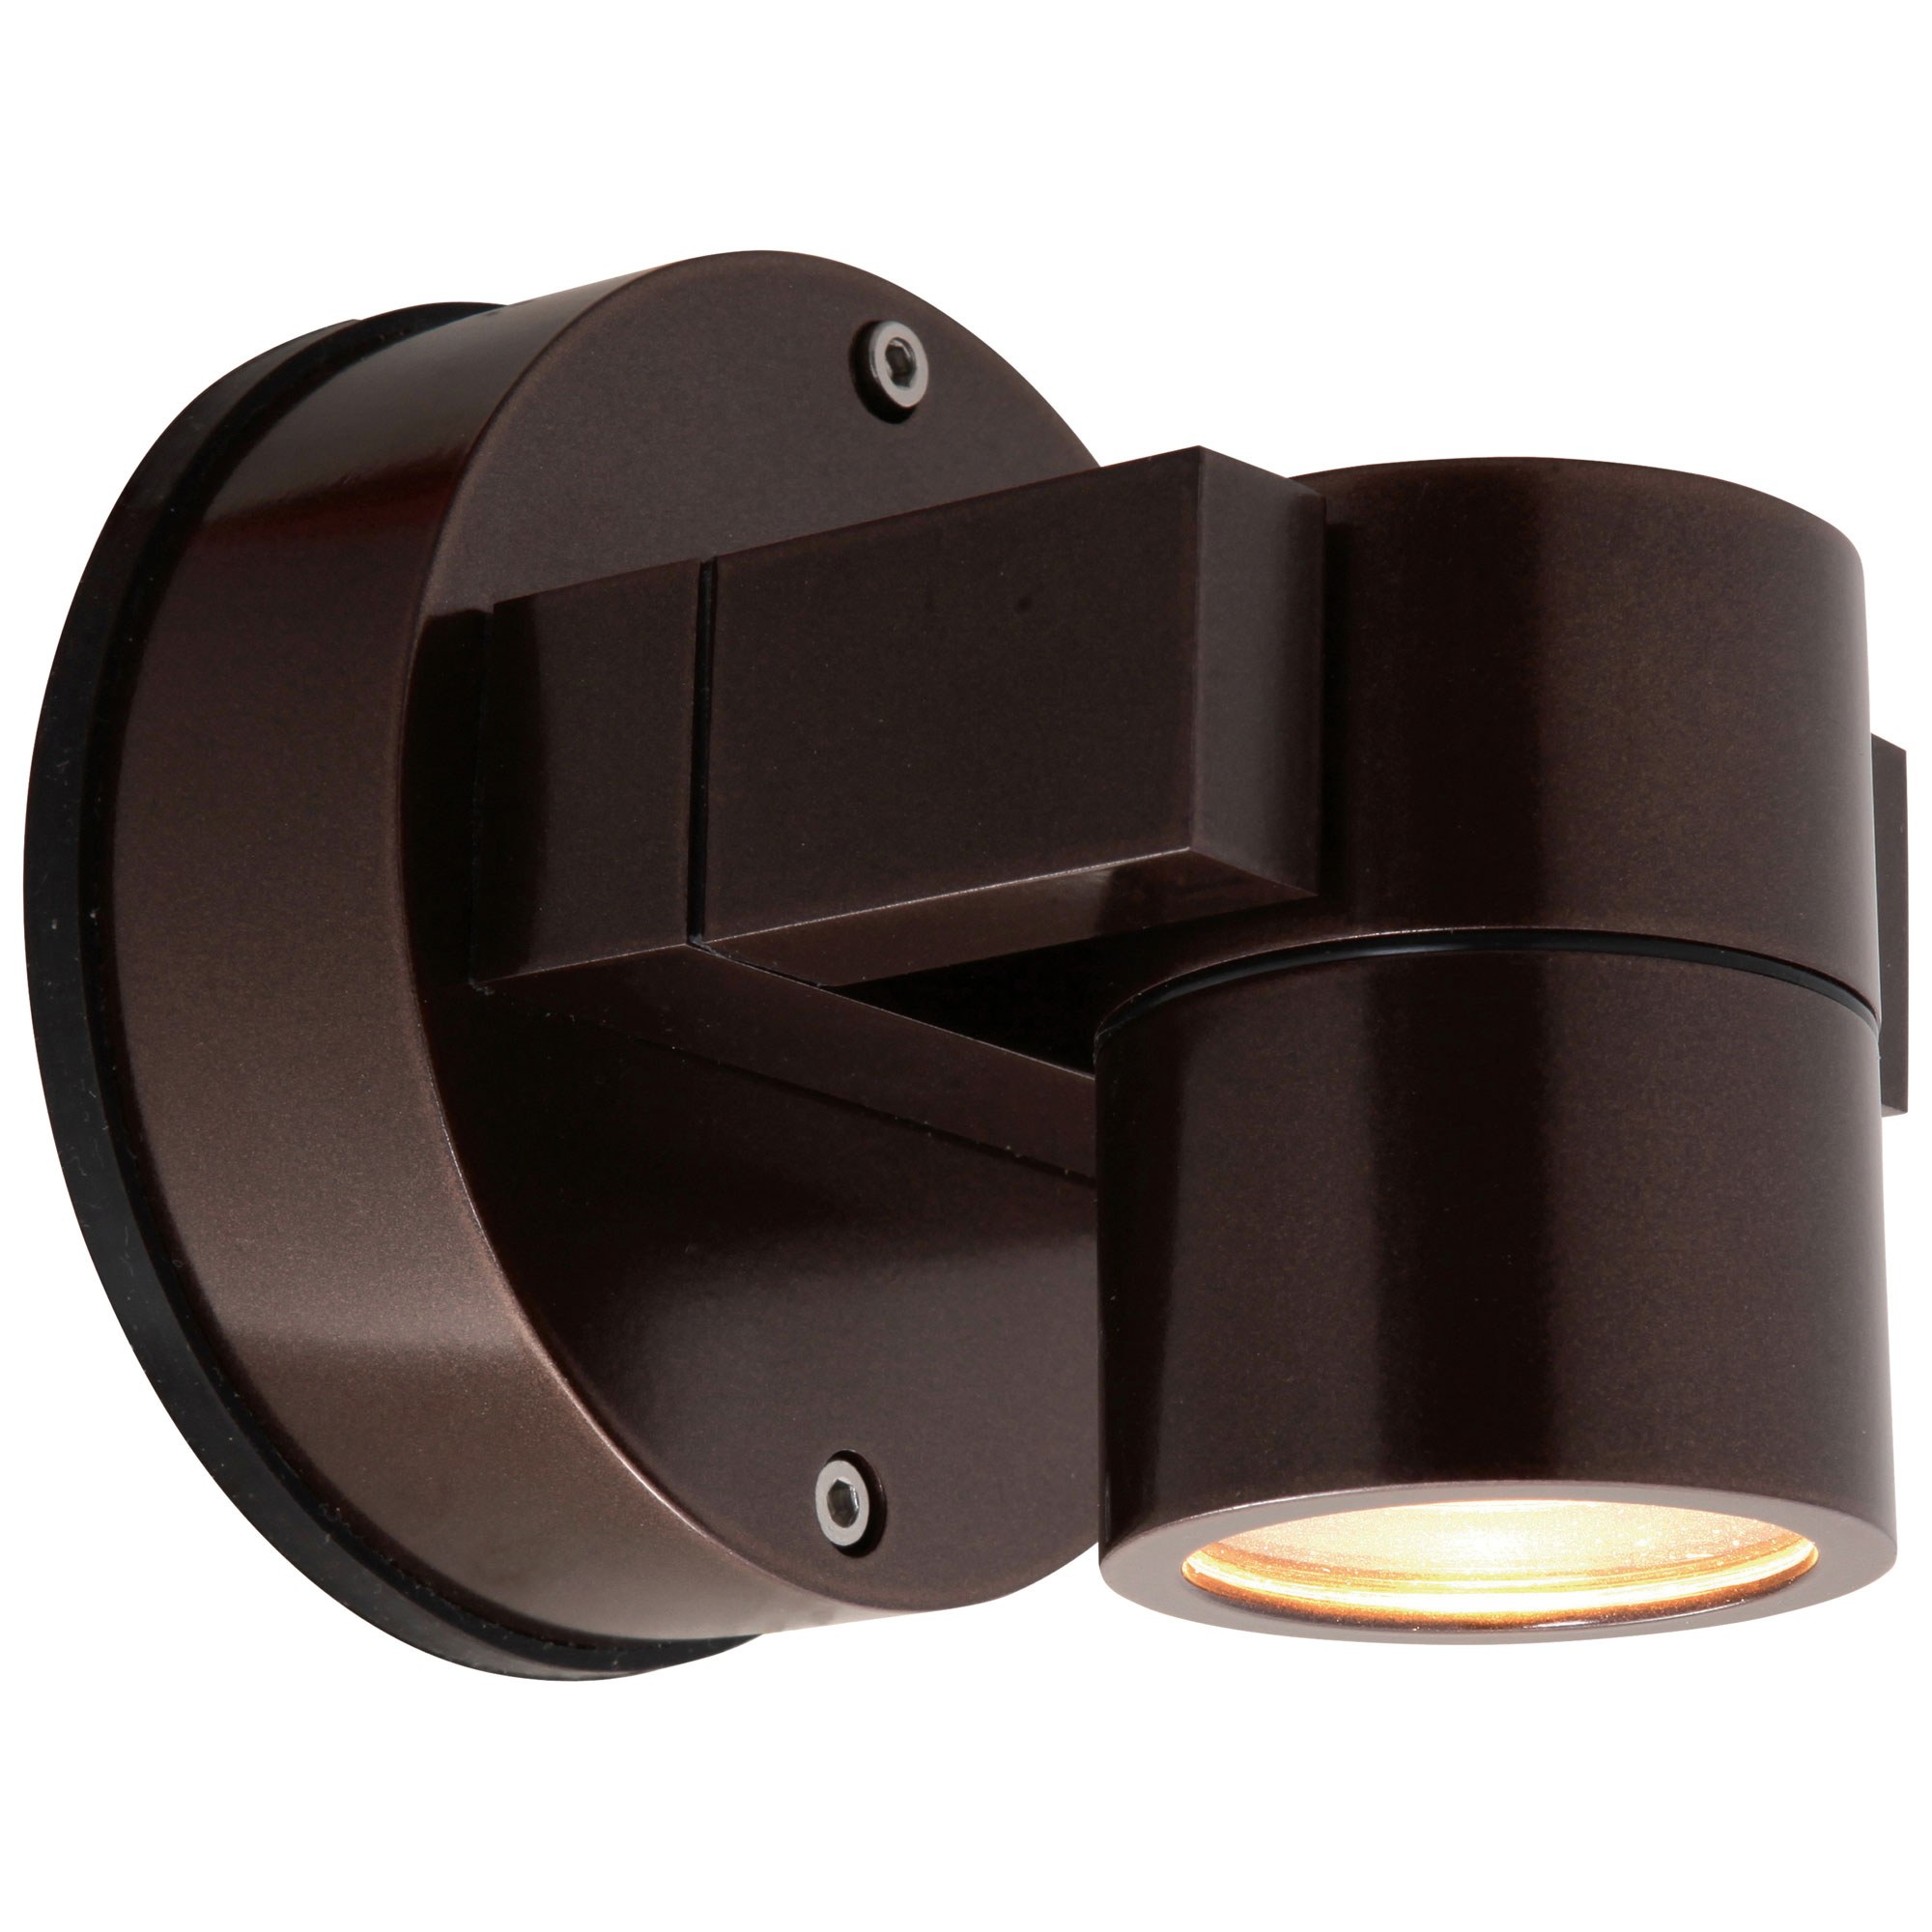 Details about   4x Outdoor LED Wall Light Sconce Waterproof UP Down Dual Head Wall Fixtures Lamp 